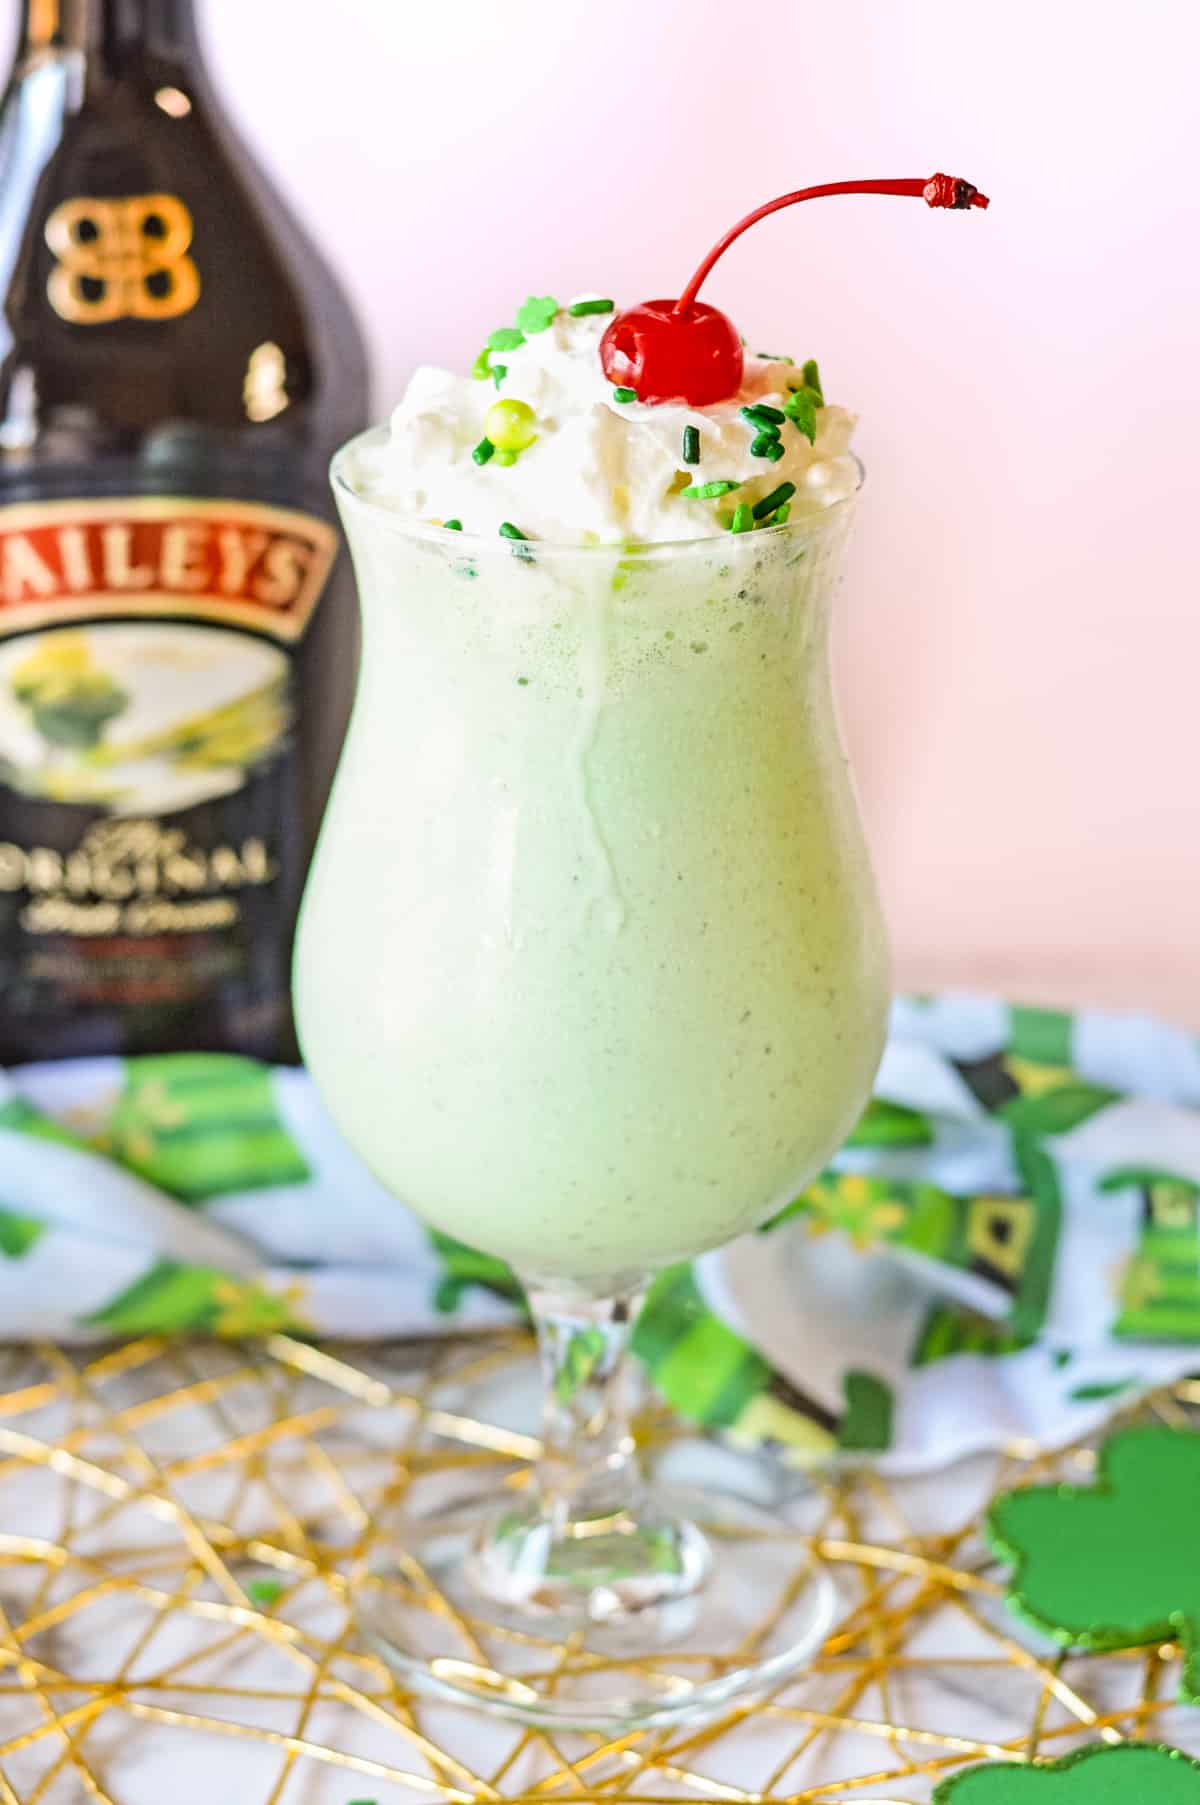 Mint green milkshake topped with whipped cream, green sprinkles, and a cherry. A bottle of baileys in background.